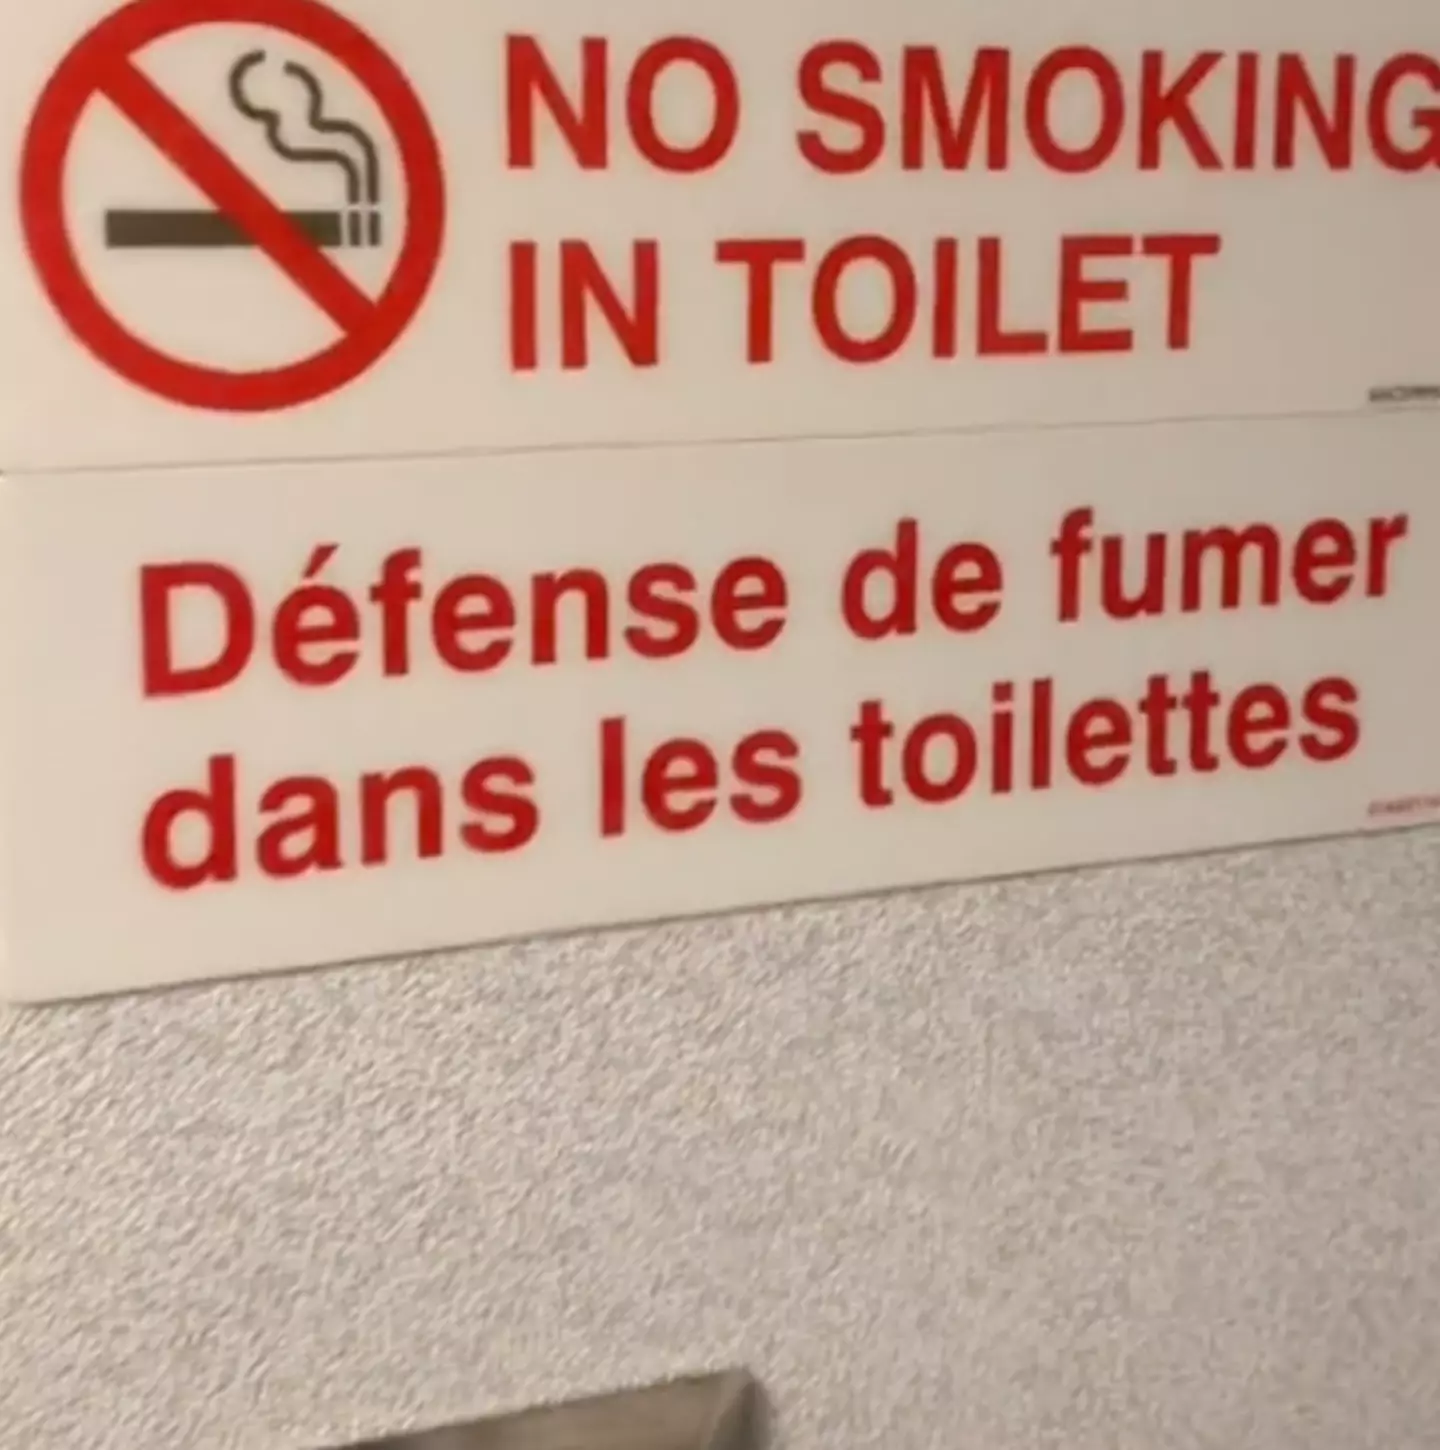 Especially when the sign clearly says no smoking.